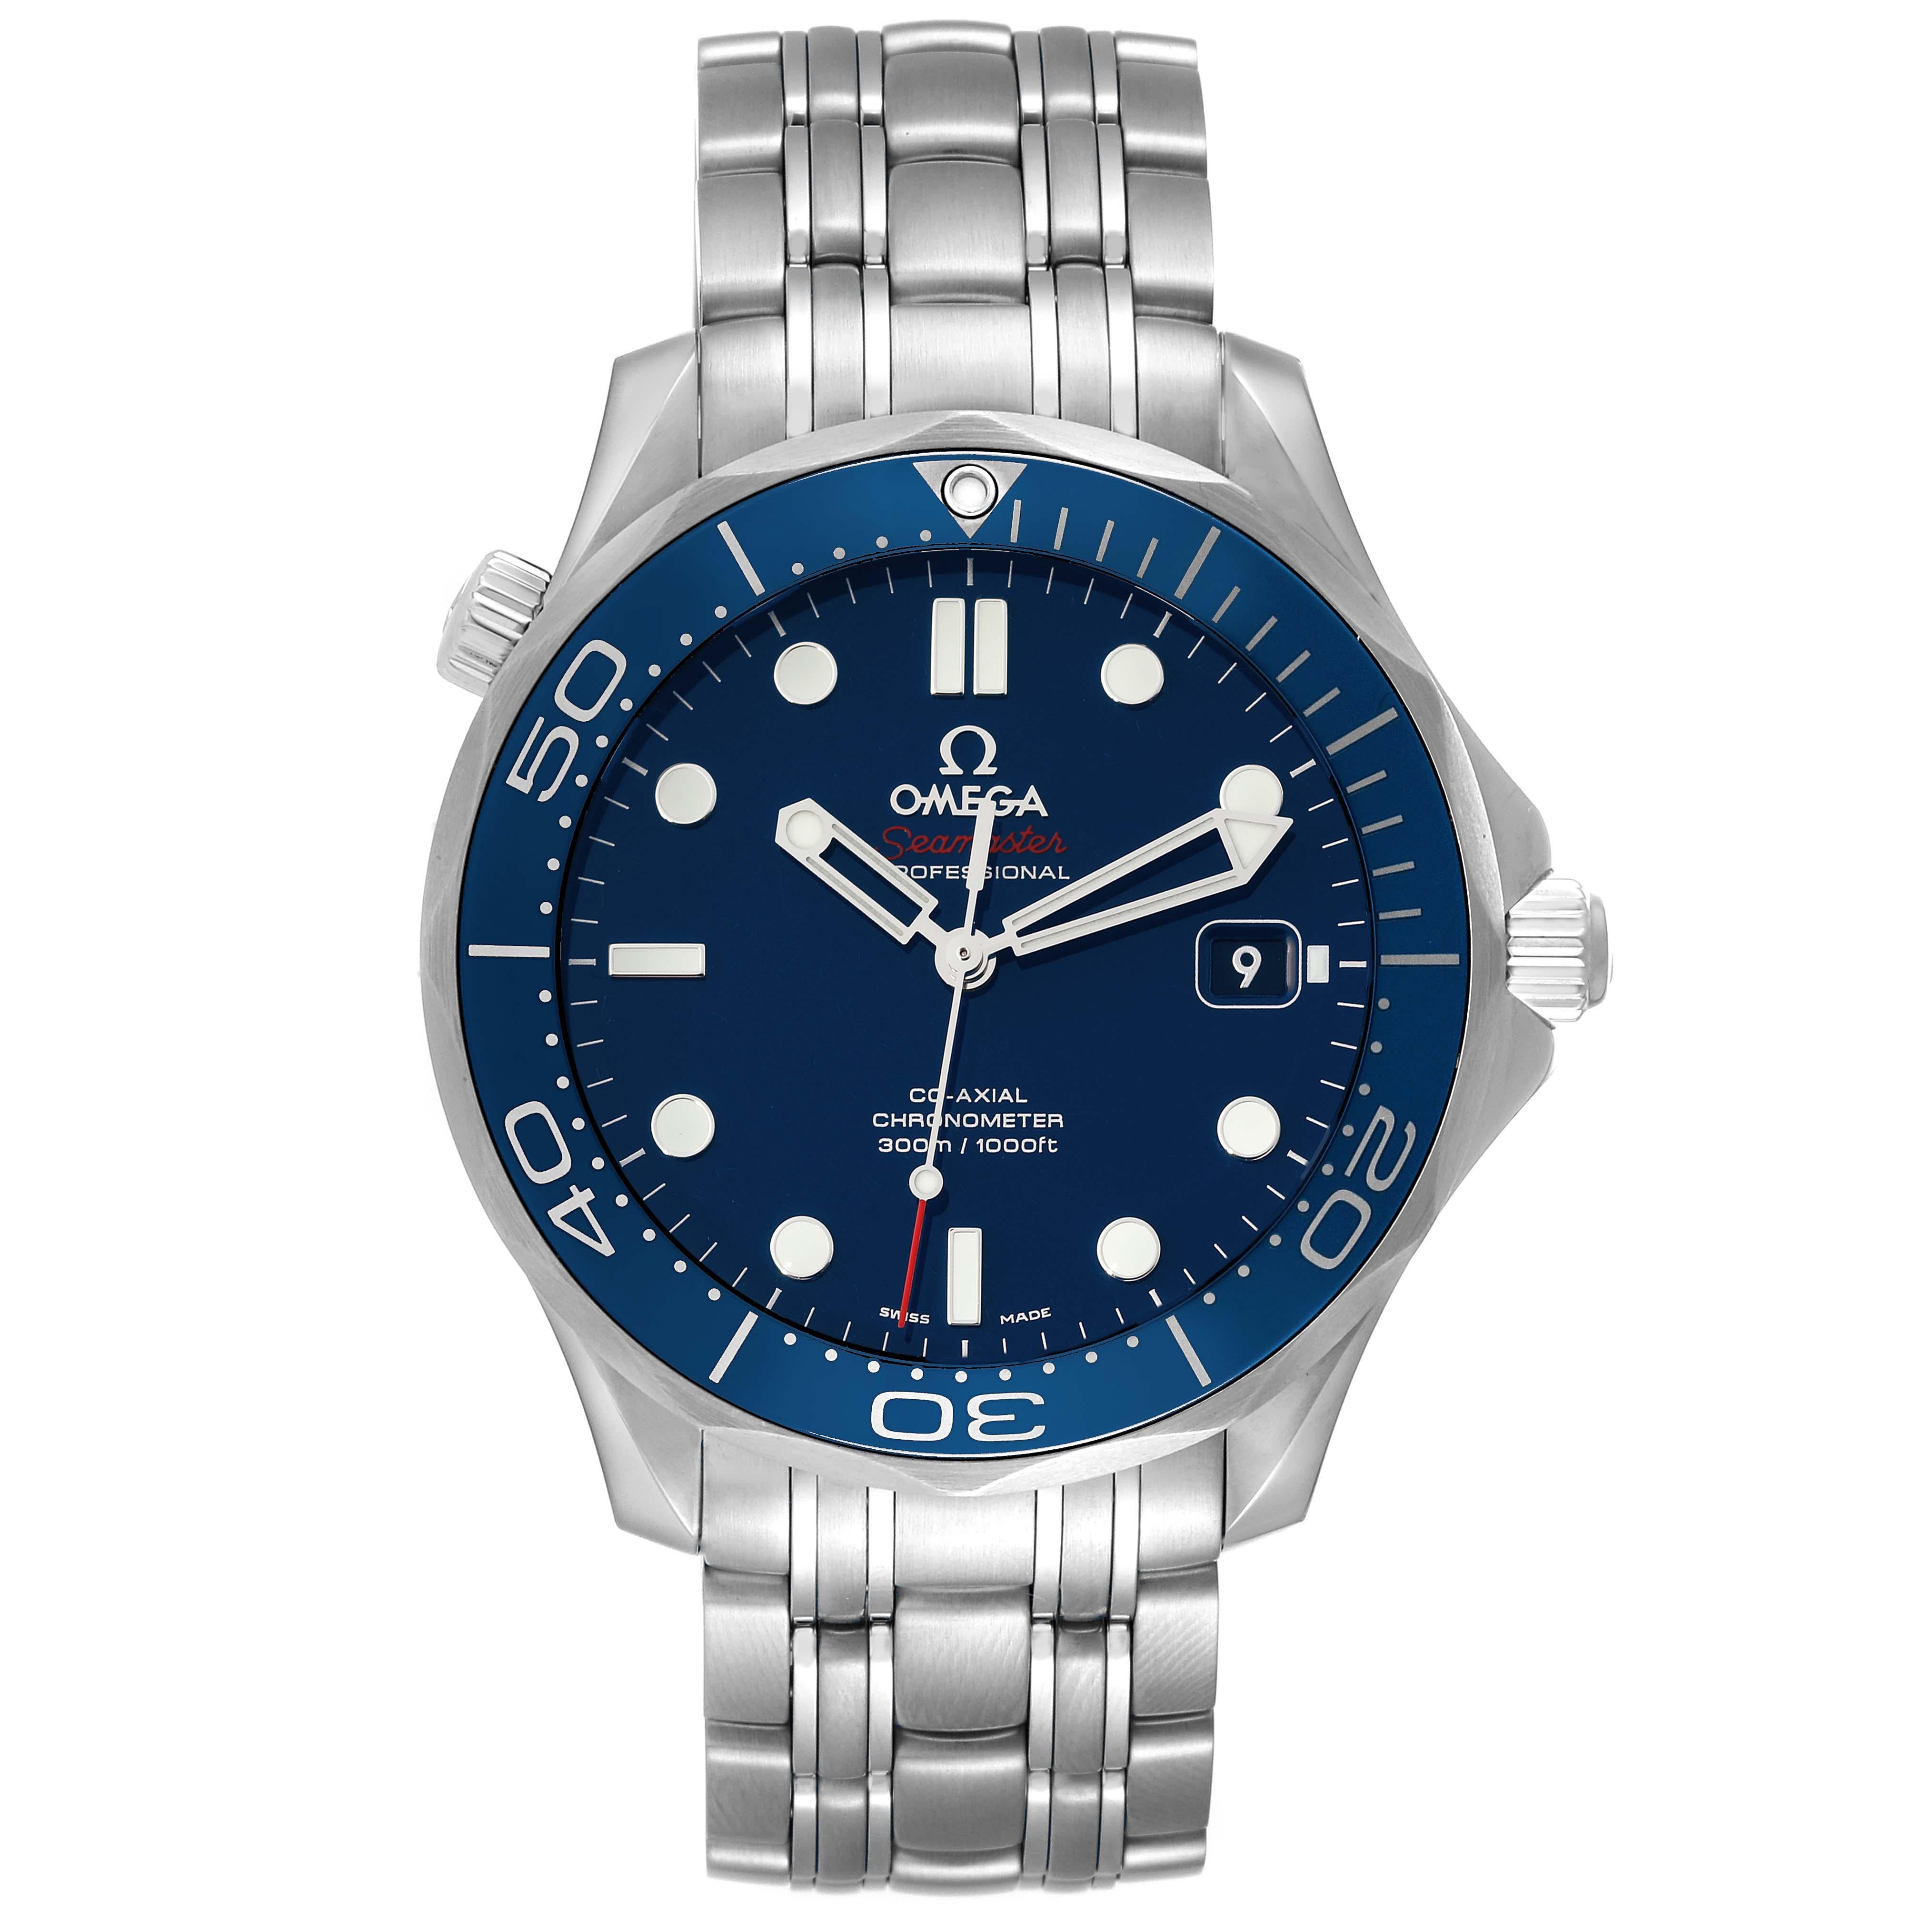 Omega Seamaster Diver 300M Co-Axial Steel Mens Watch 212.30.41.20.03.001. Automatic self-winding chronometer, Co-Axial Escapement movement with rhodium-plated finish. Stainless steel case 41.0 mm in diameter. Helium escape valve at 10 o'clock. Omega